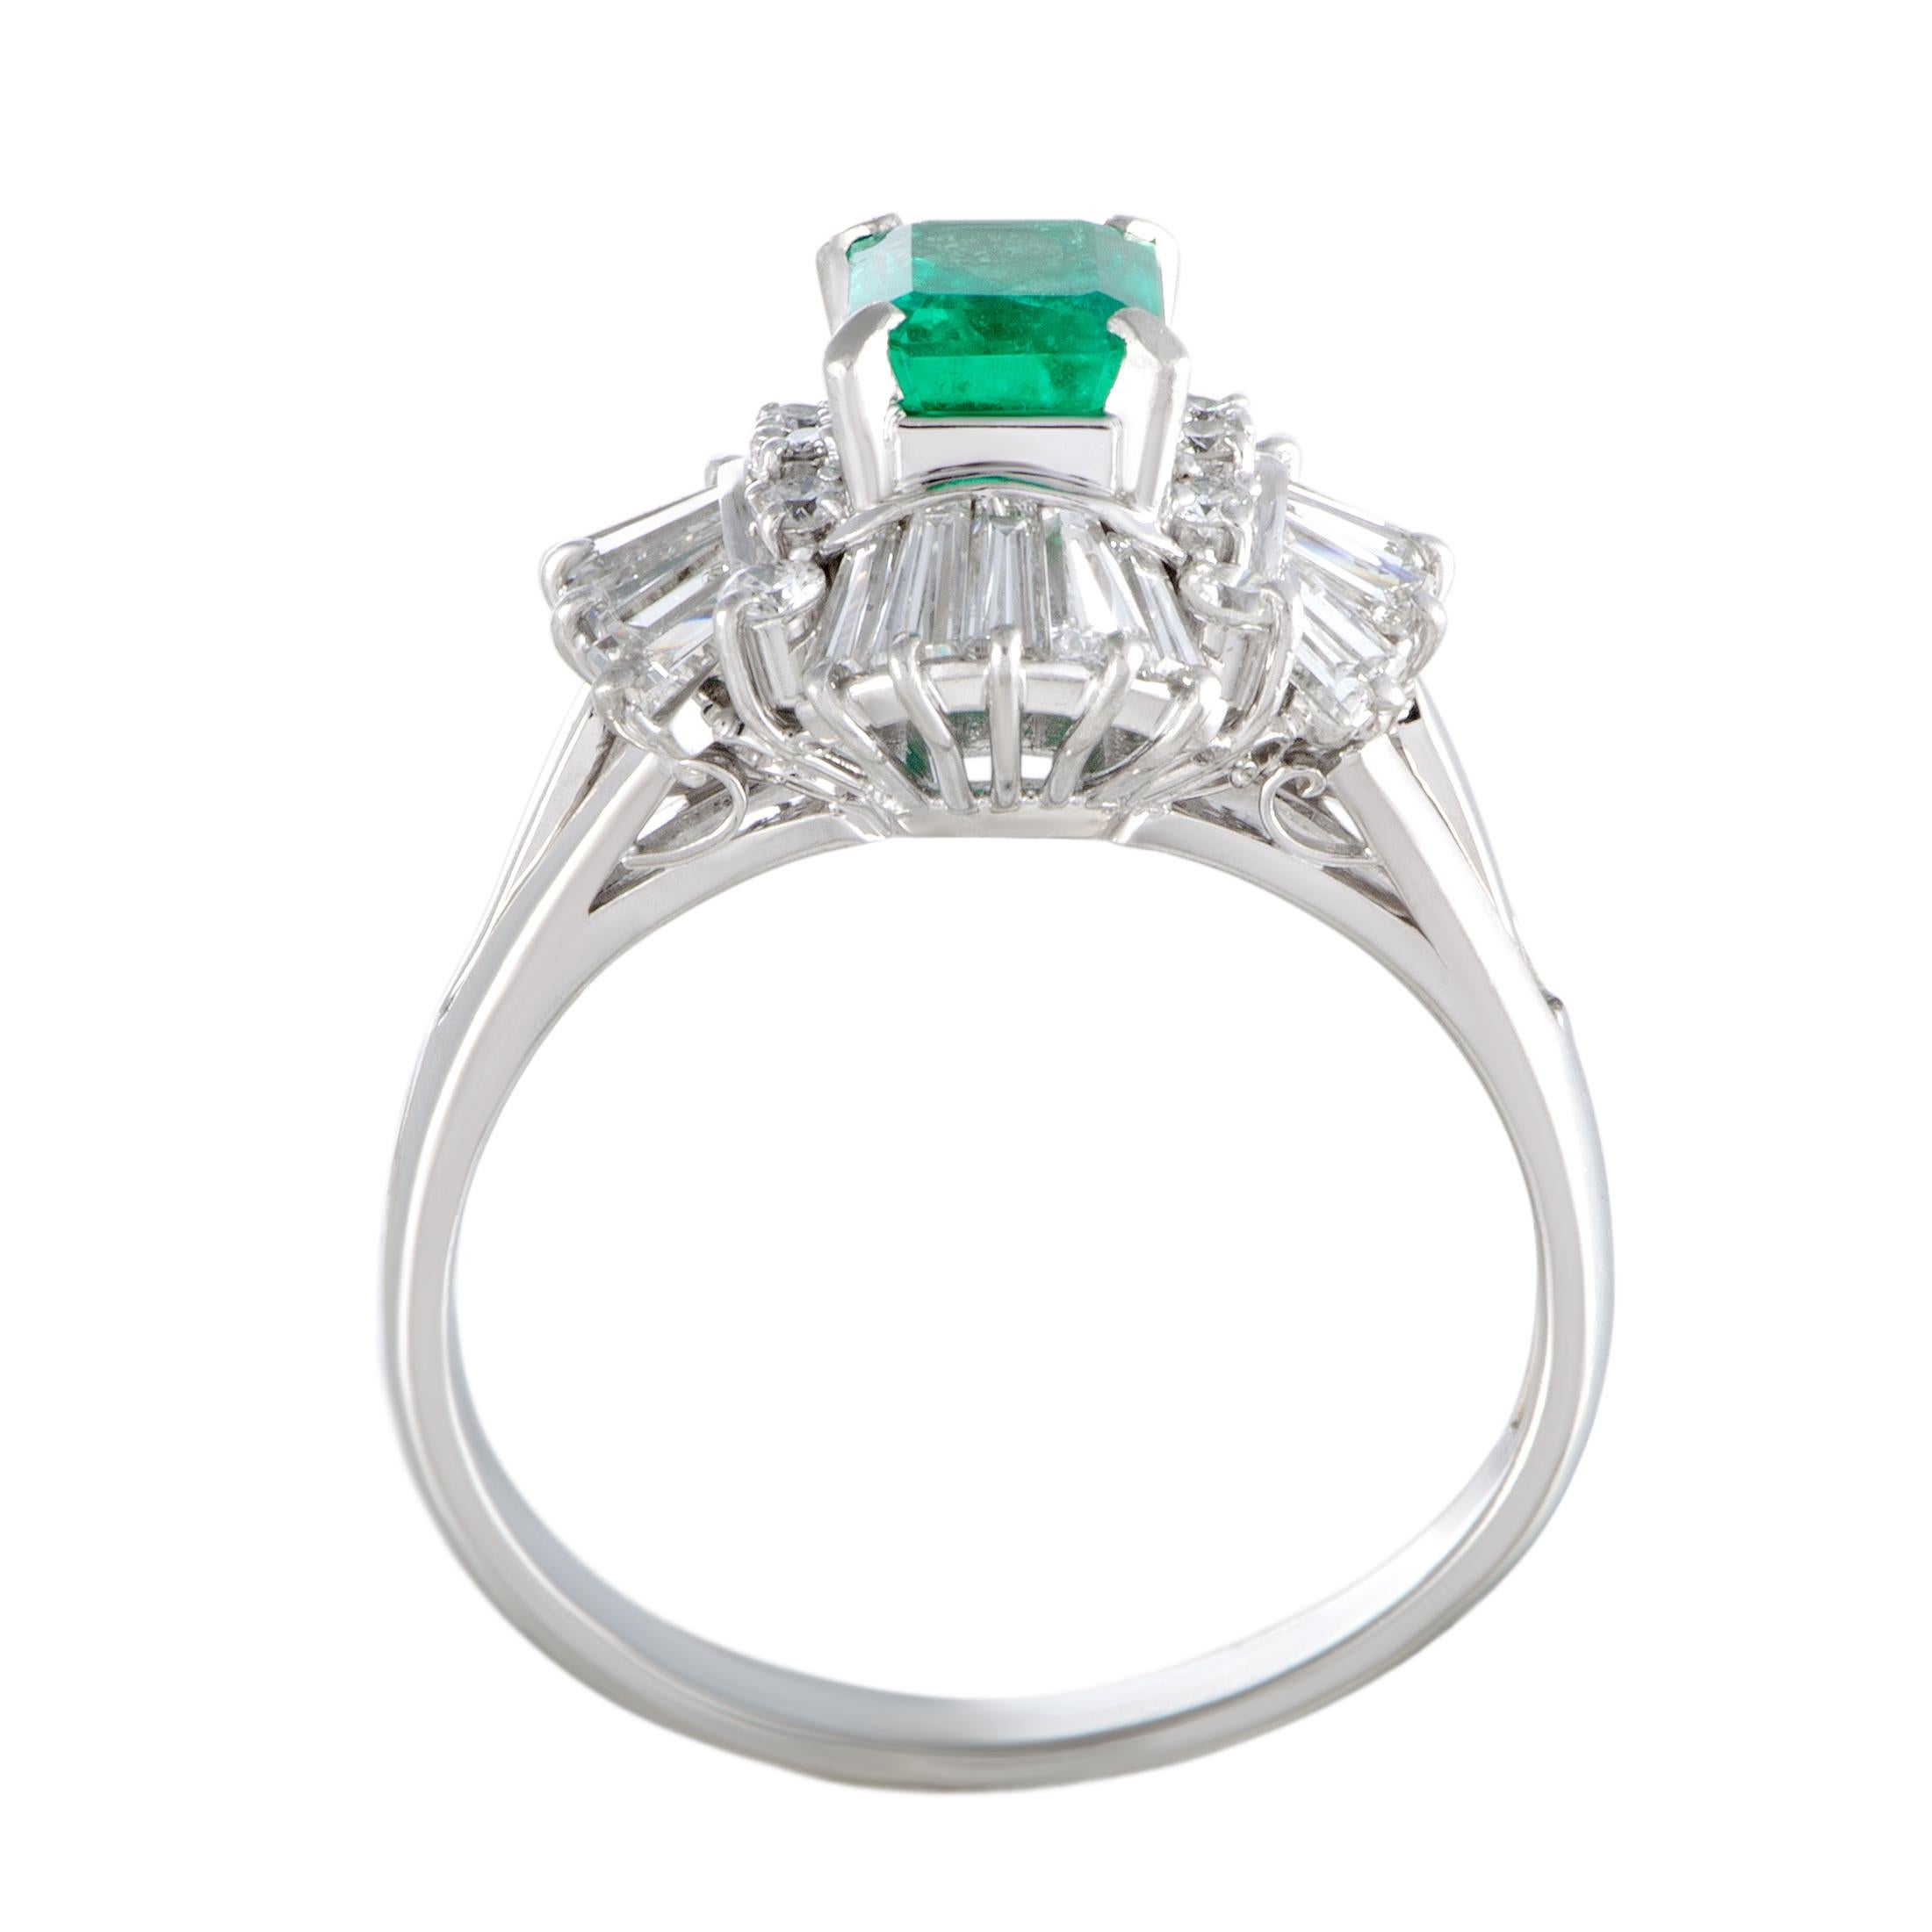 Splendidly decorated with resplendent diamonds and with a stunning emerald that are beautifully set against the elegantly gleaming platinum, this spectacular ring boasts a remarkably extravagant appeal. The emerald weighs 1.16 carats and the